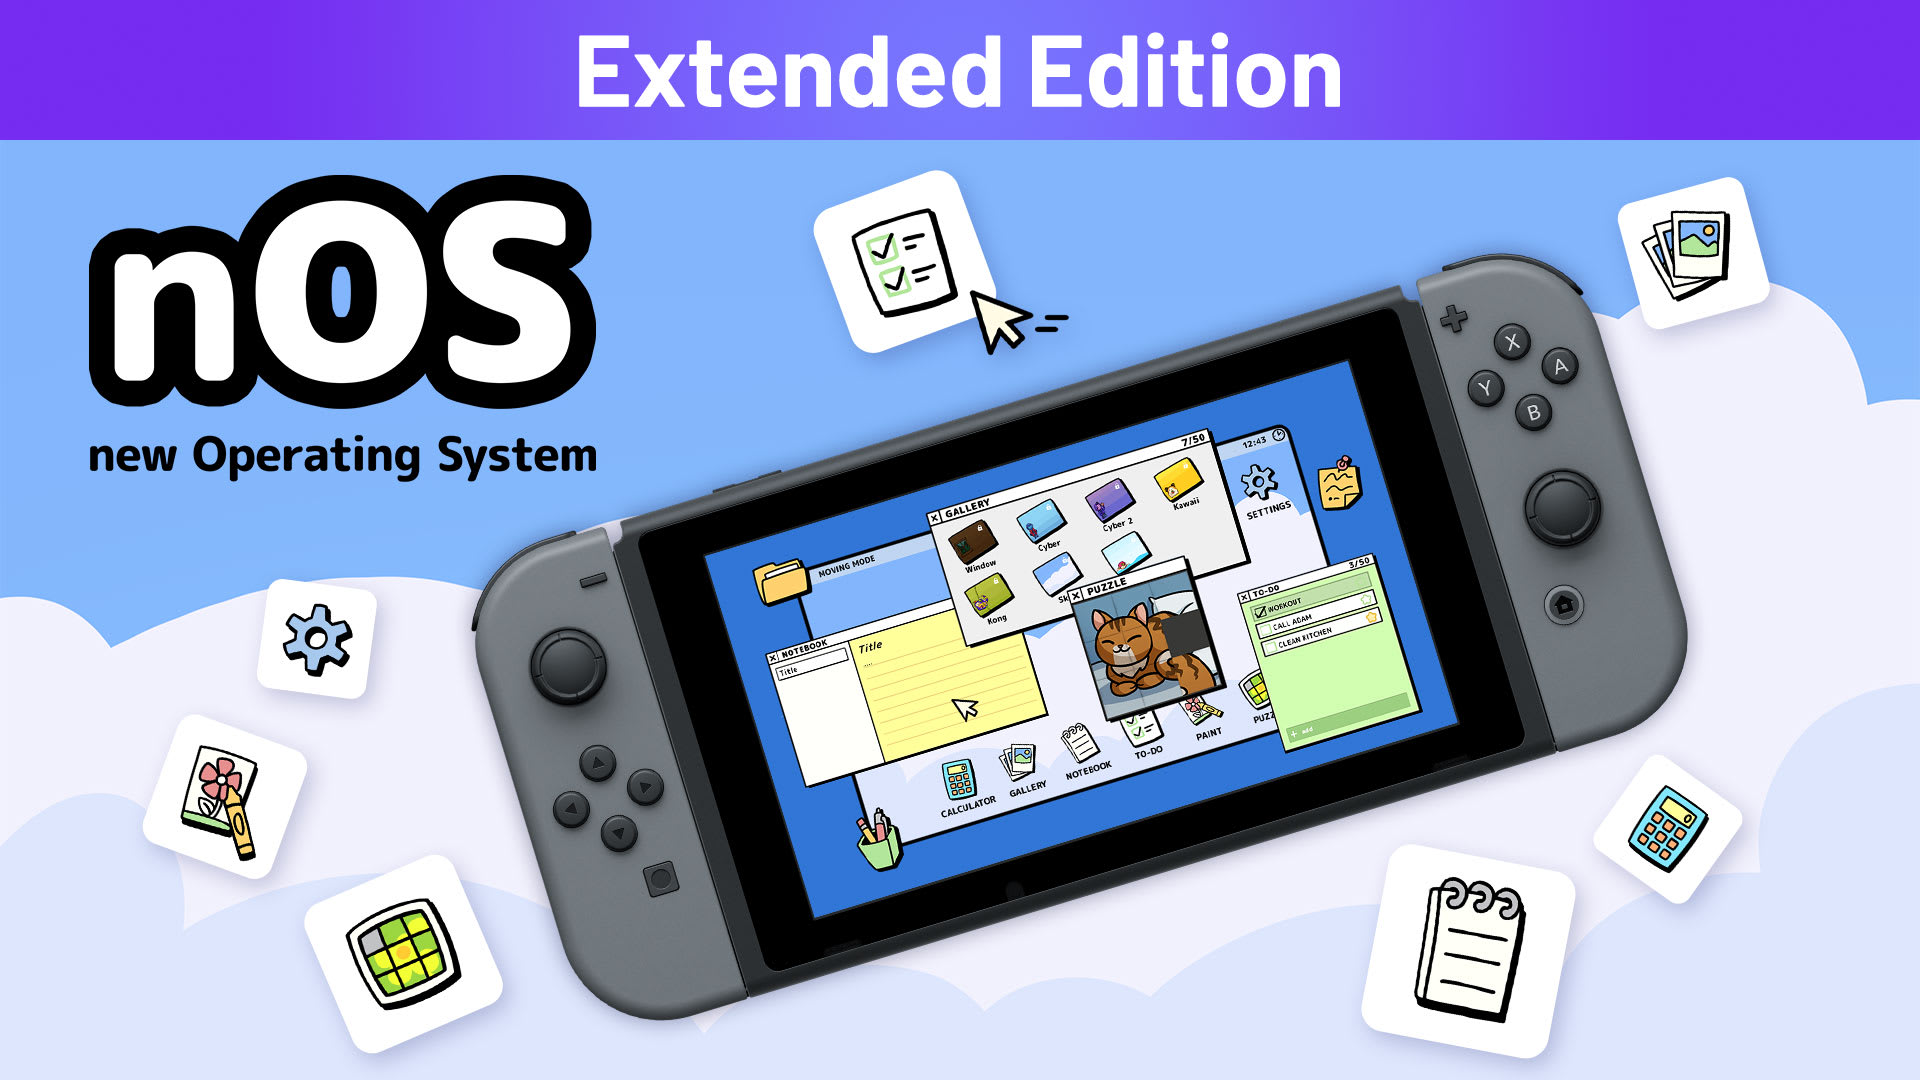 nOS new Operating System Extended Edition